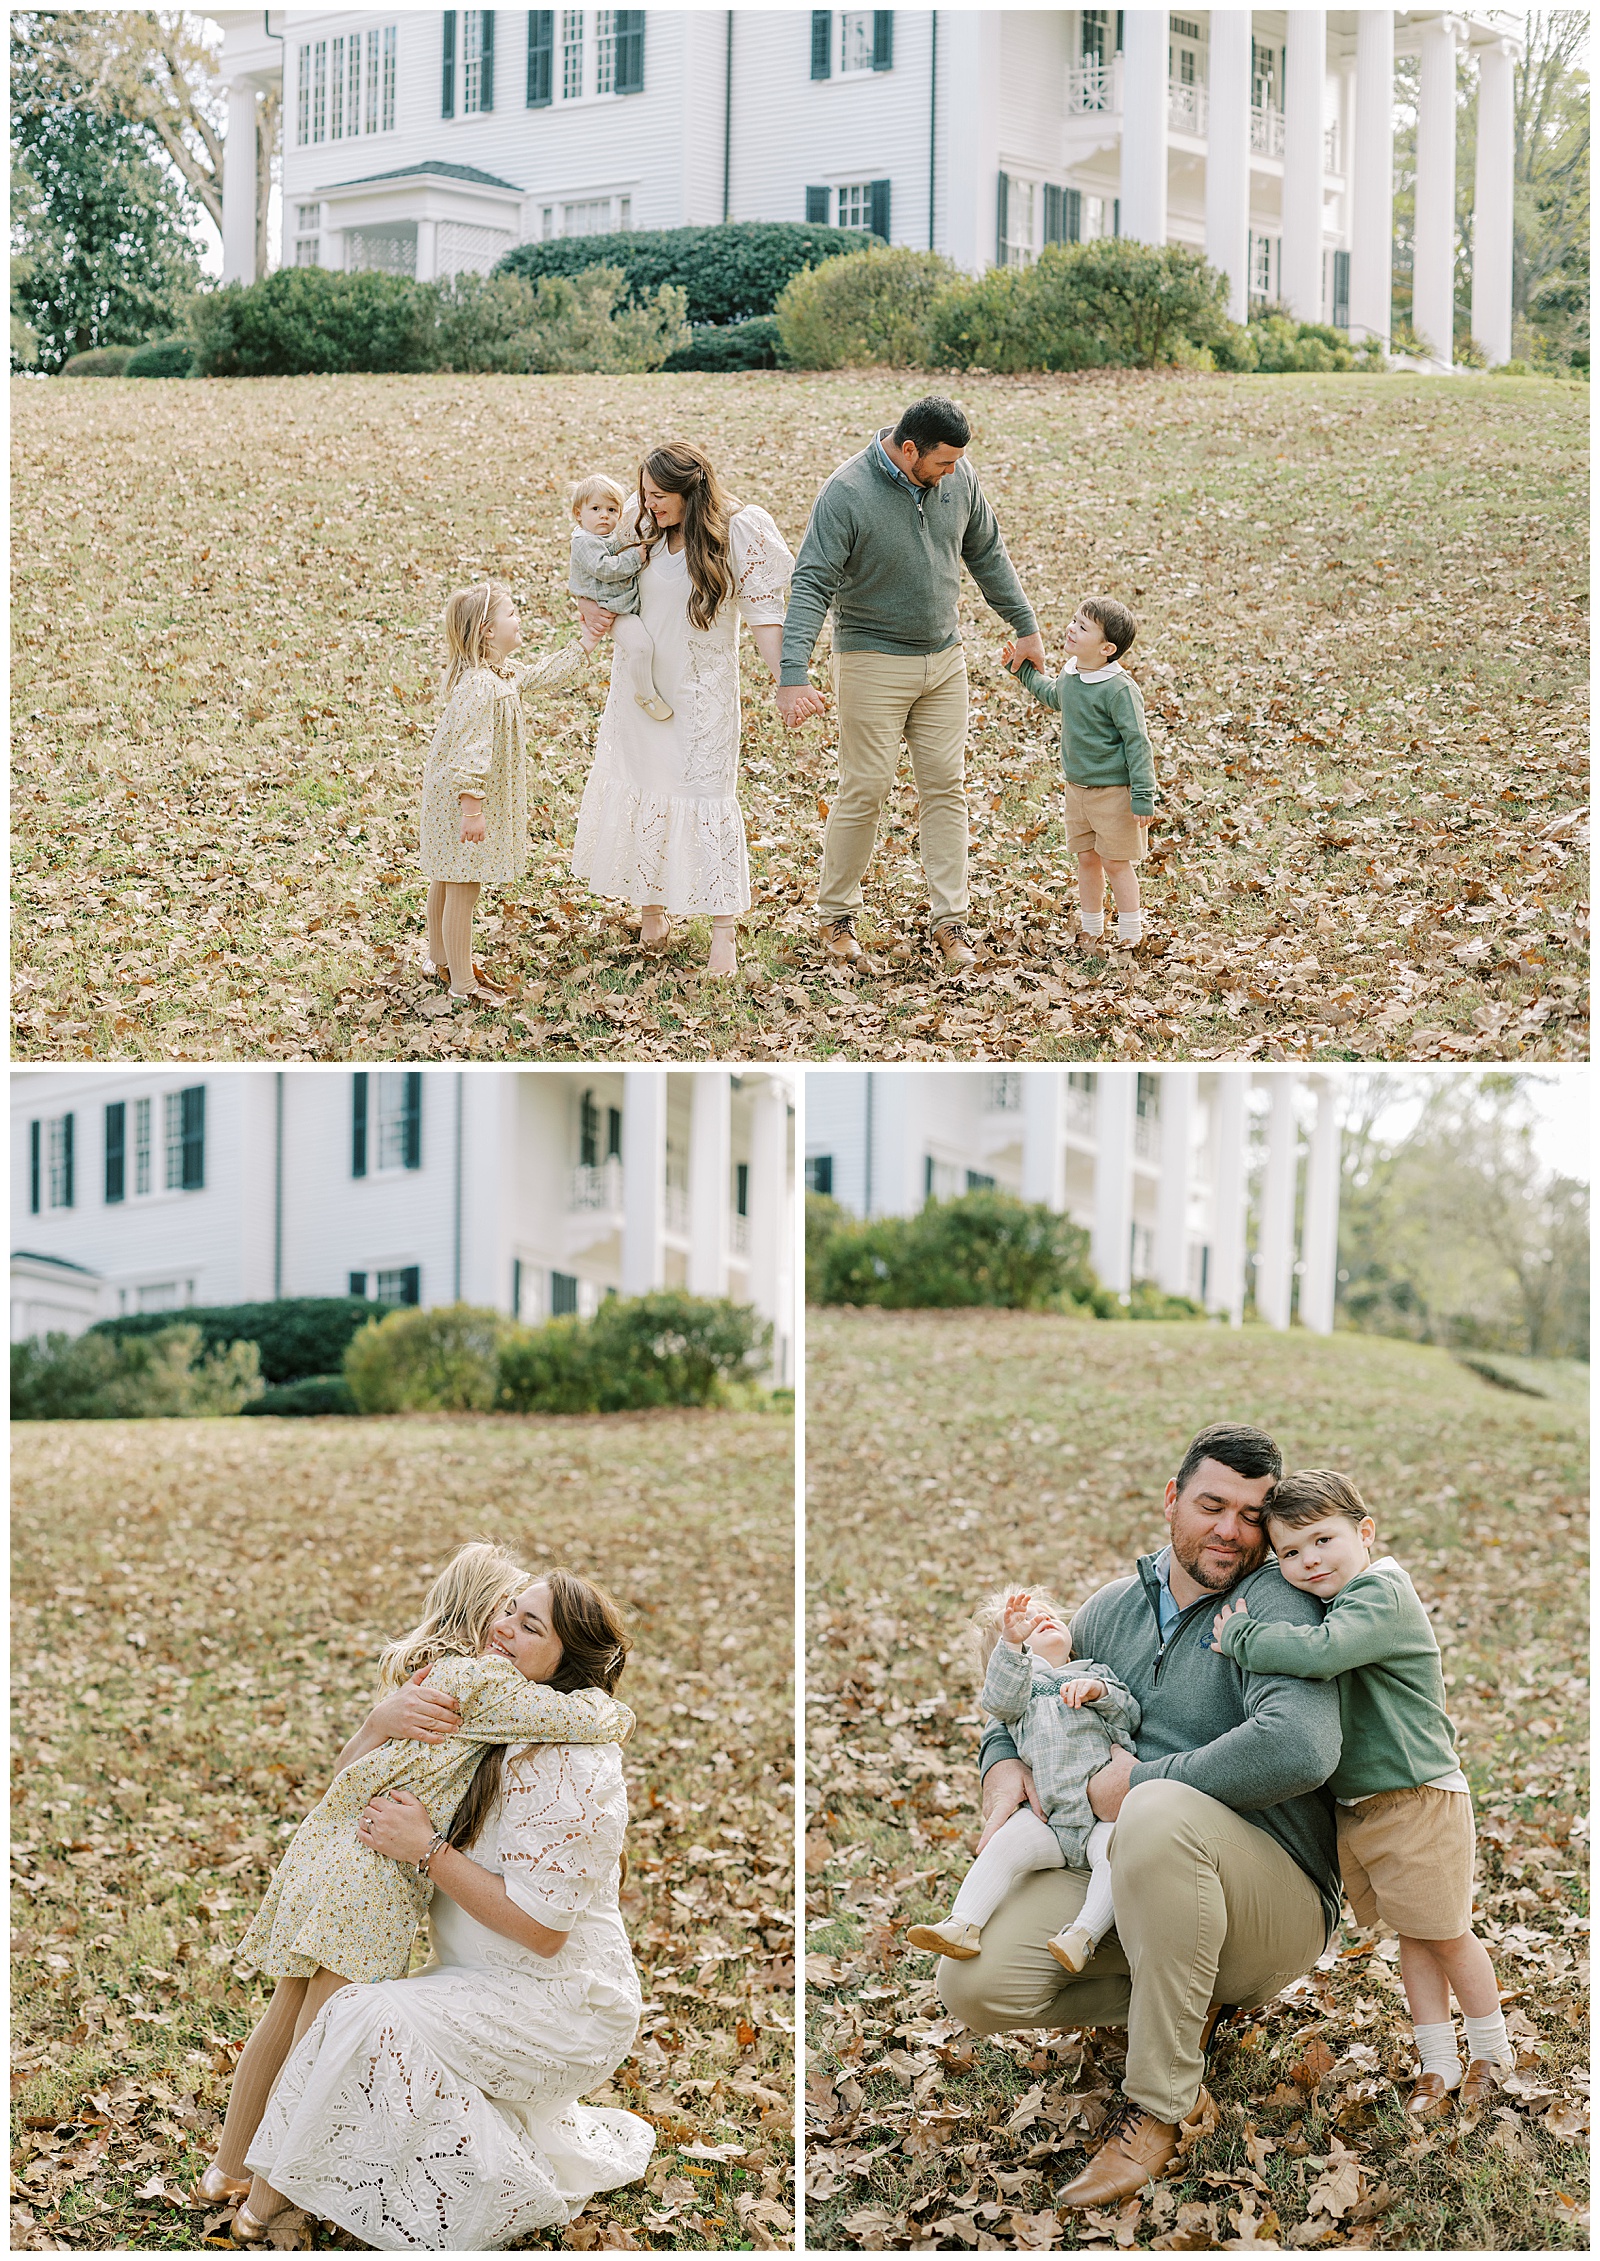 Fall family session at Oak Hill, site of the Carmichael Mansion in the movie Sweet Home Alabama